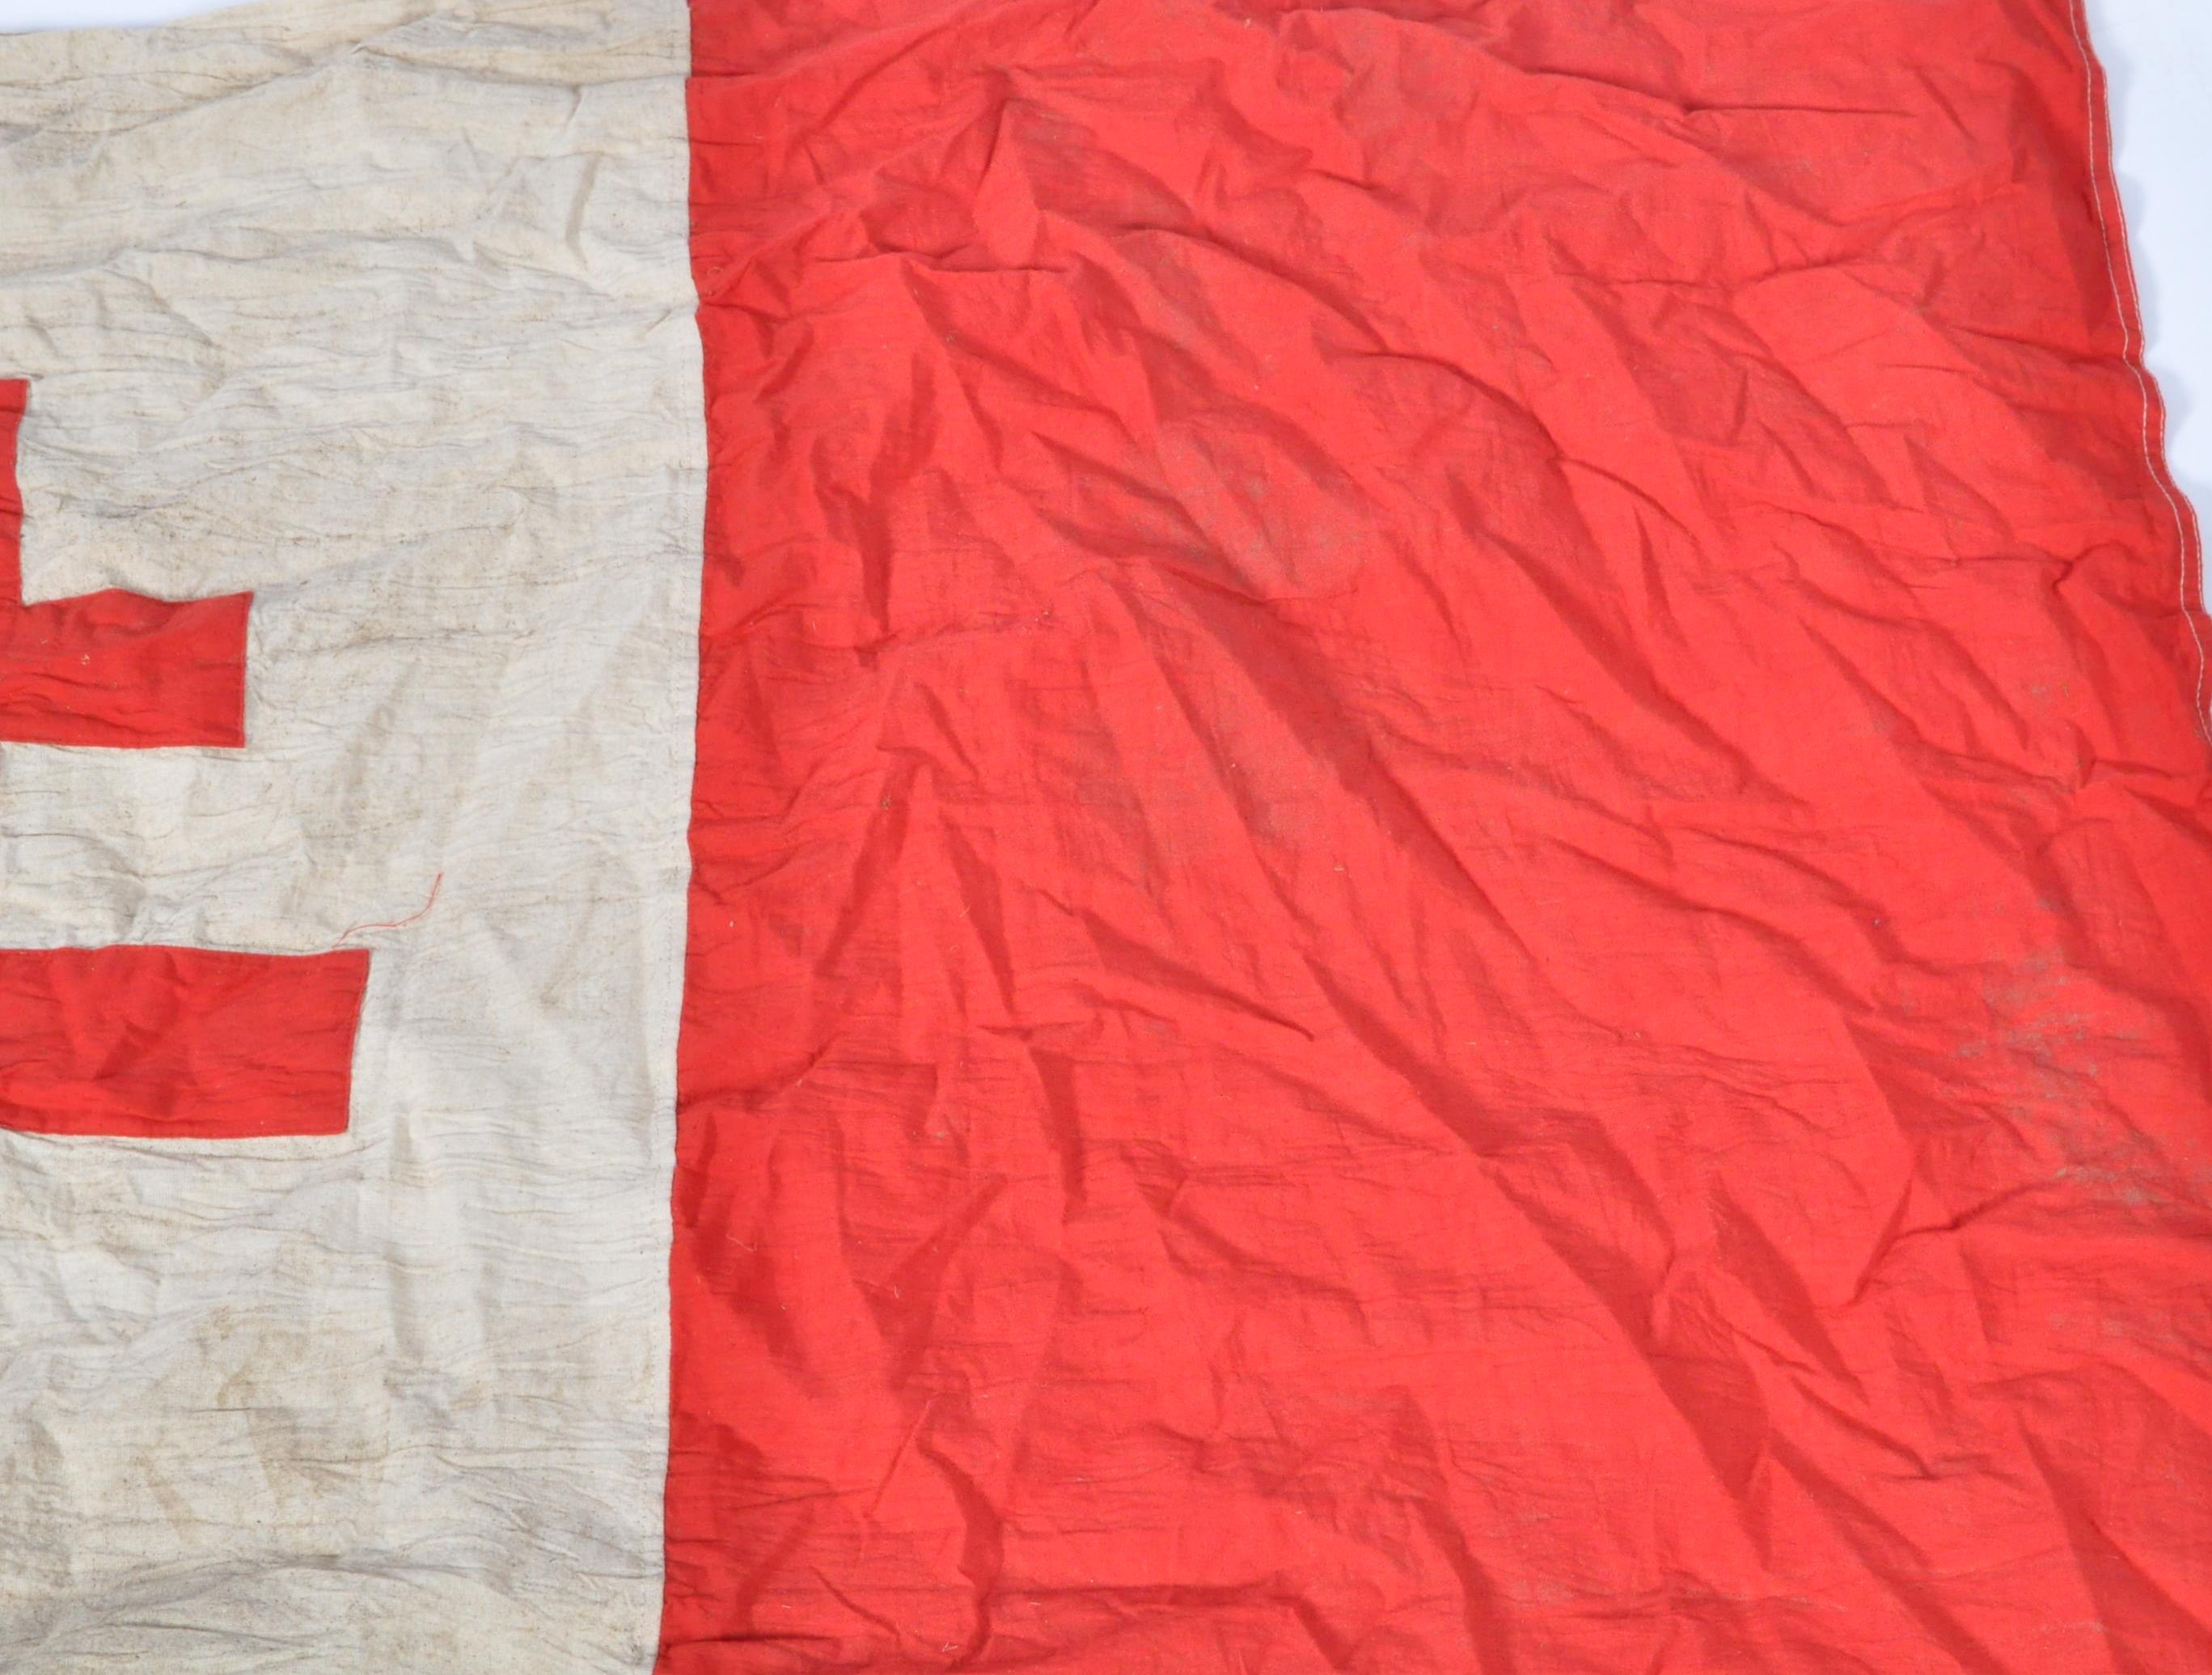 WWII TYPE ' FRENCH RESISTANCE ' LARGE CROSS OF LORRAINE FLAG - Image 3 of 5